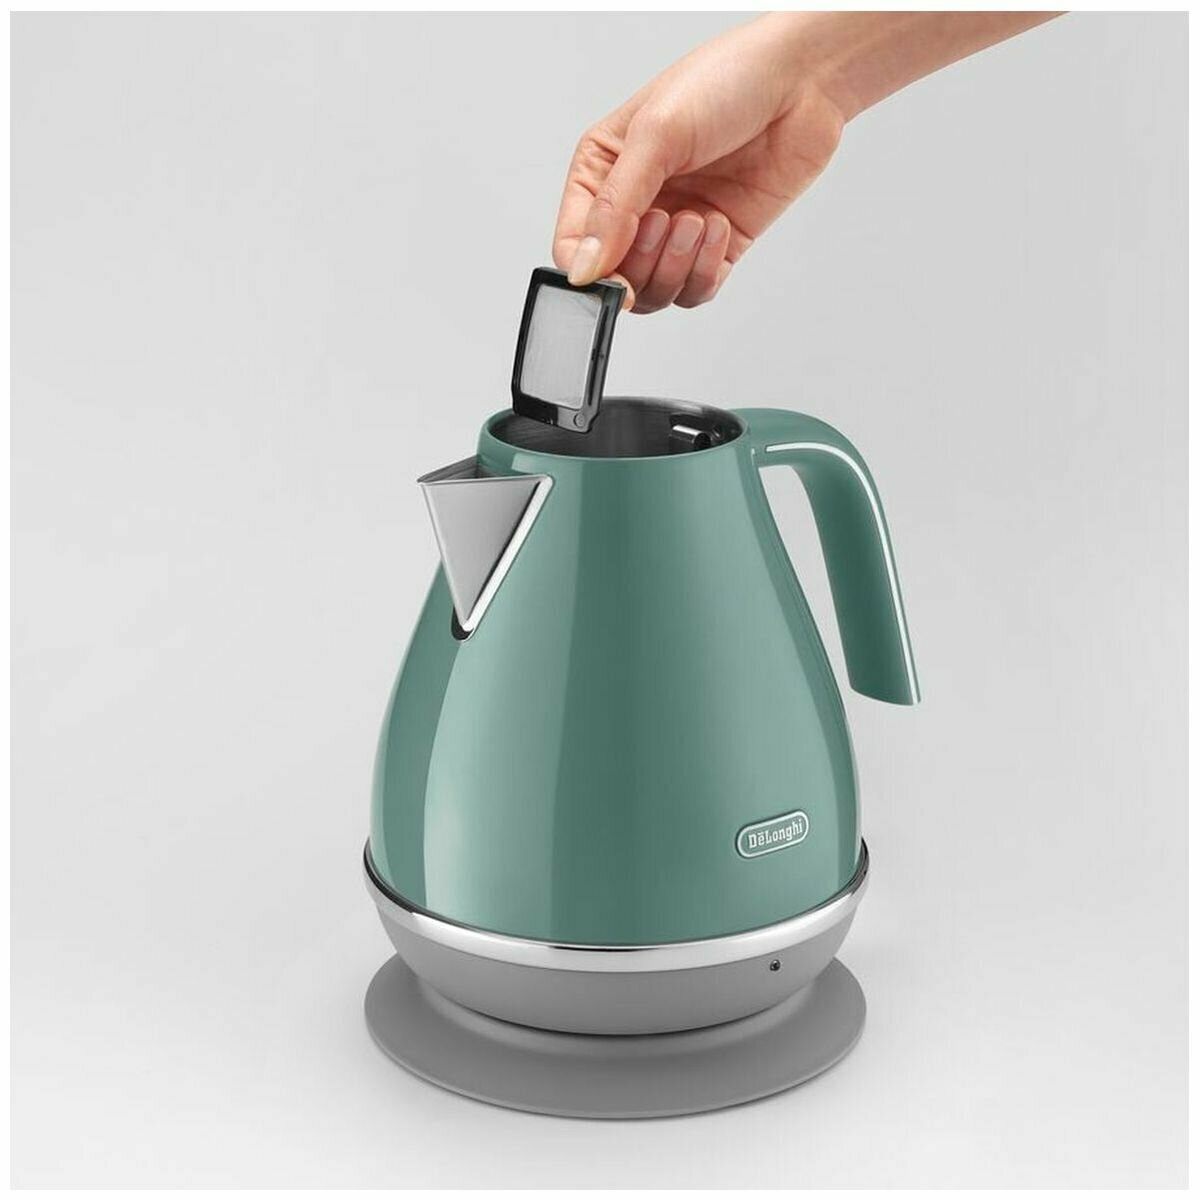 DeLonghi Icona Capitals Electric Kettle in Toronto Green